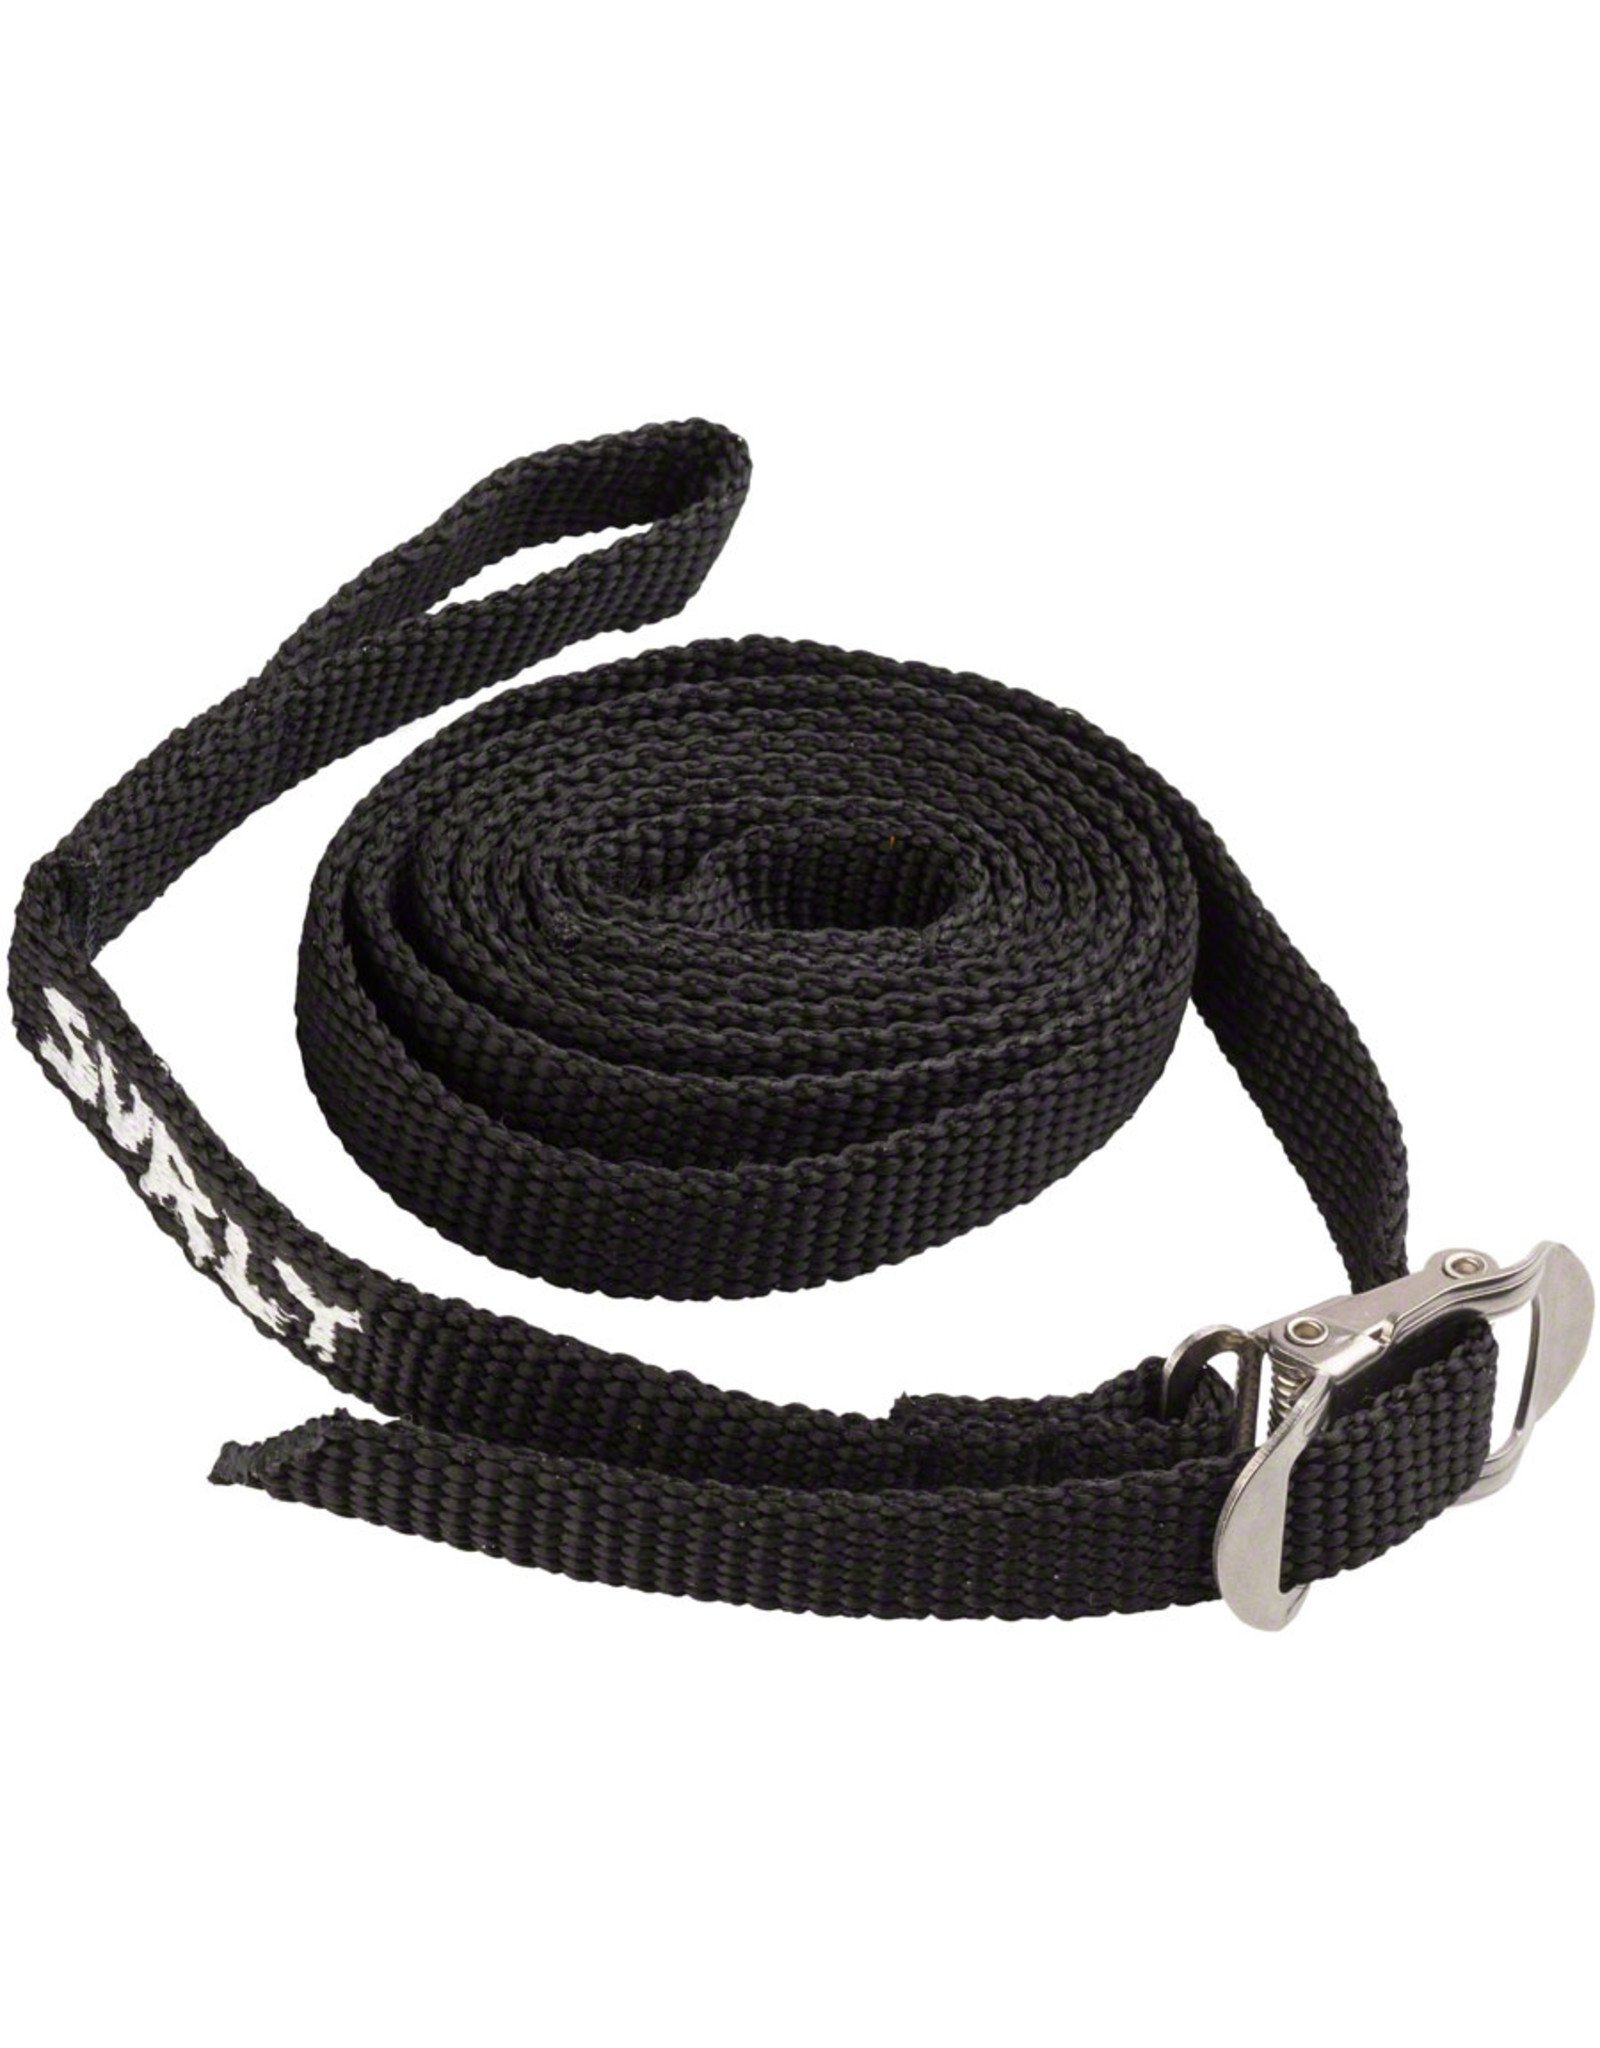 $10.00. Surly Junk Strap is for use as a tie-down for whatever junk you hav...